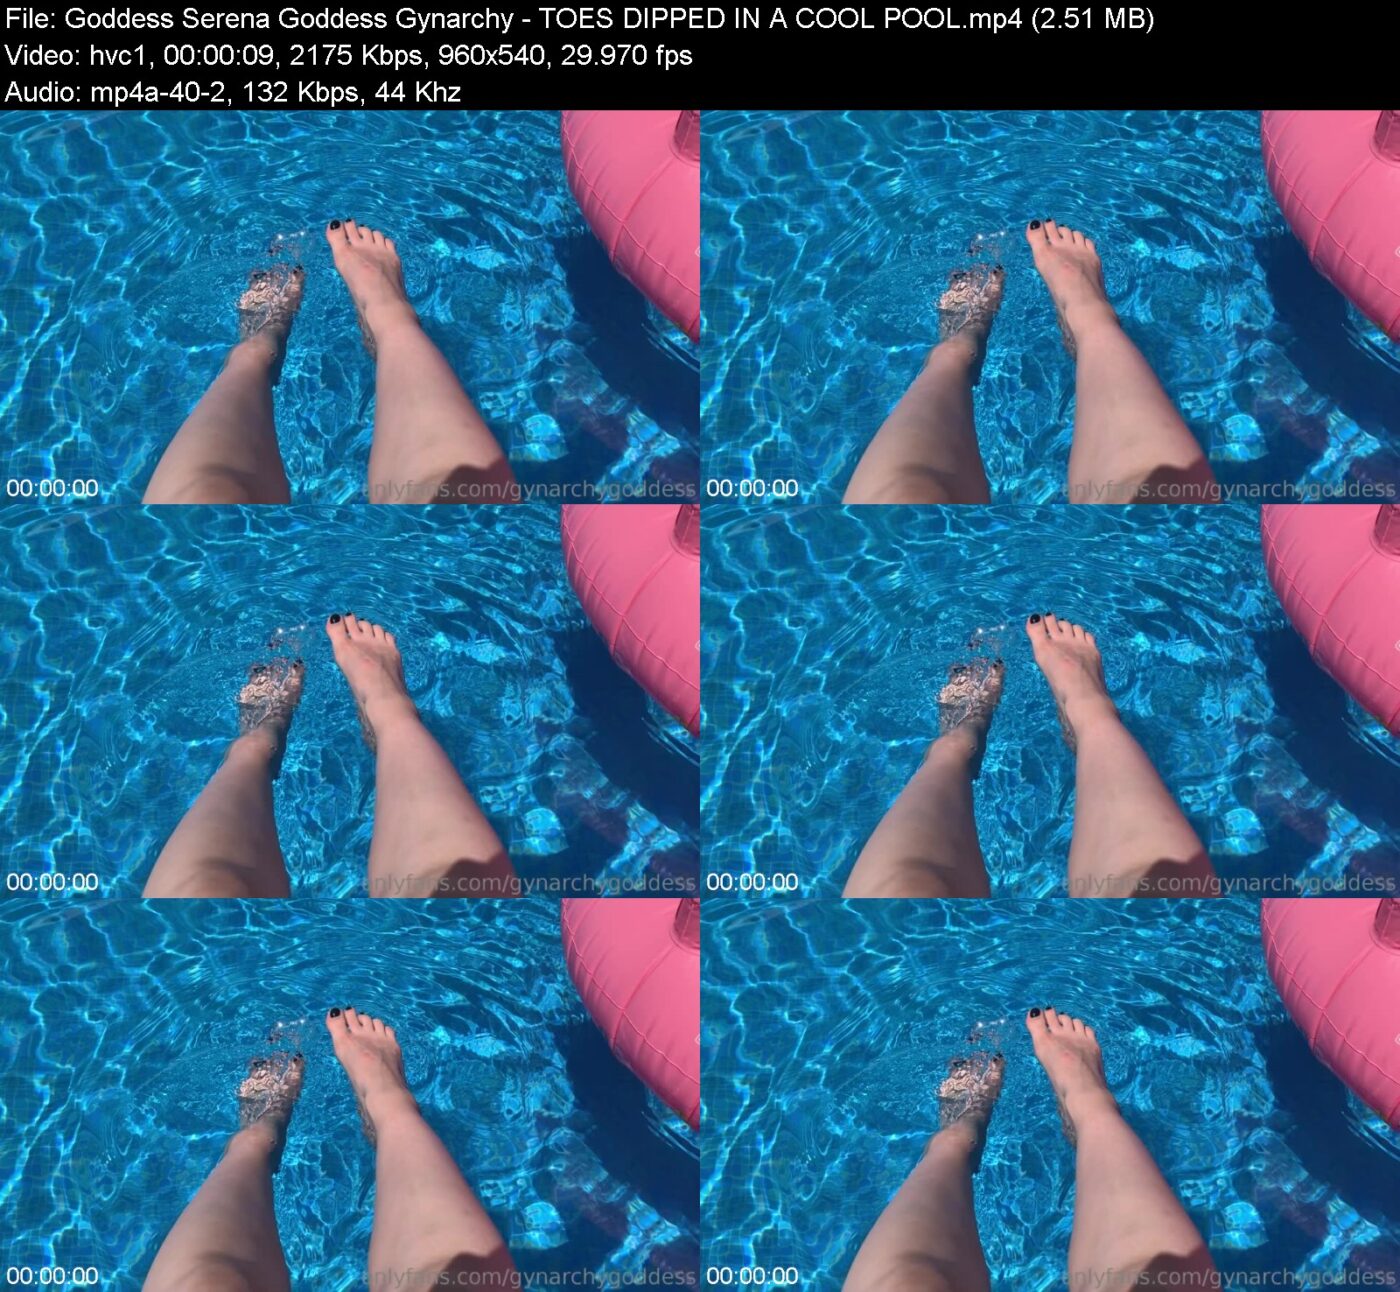 Goddess Serena Goddess Gynarchy in TOES DIPPED IN A COOL POOL